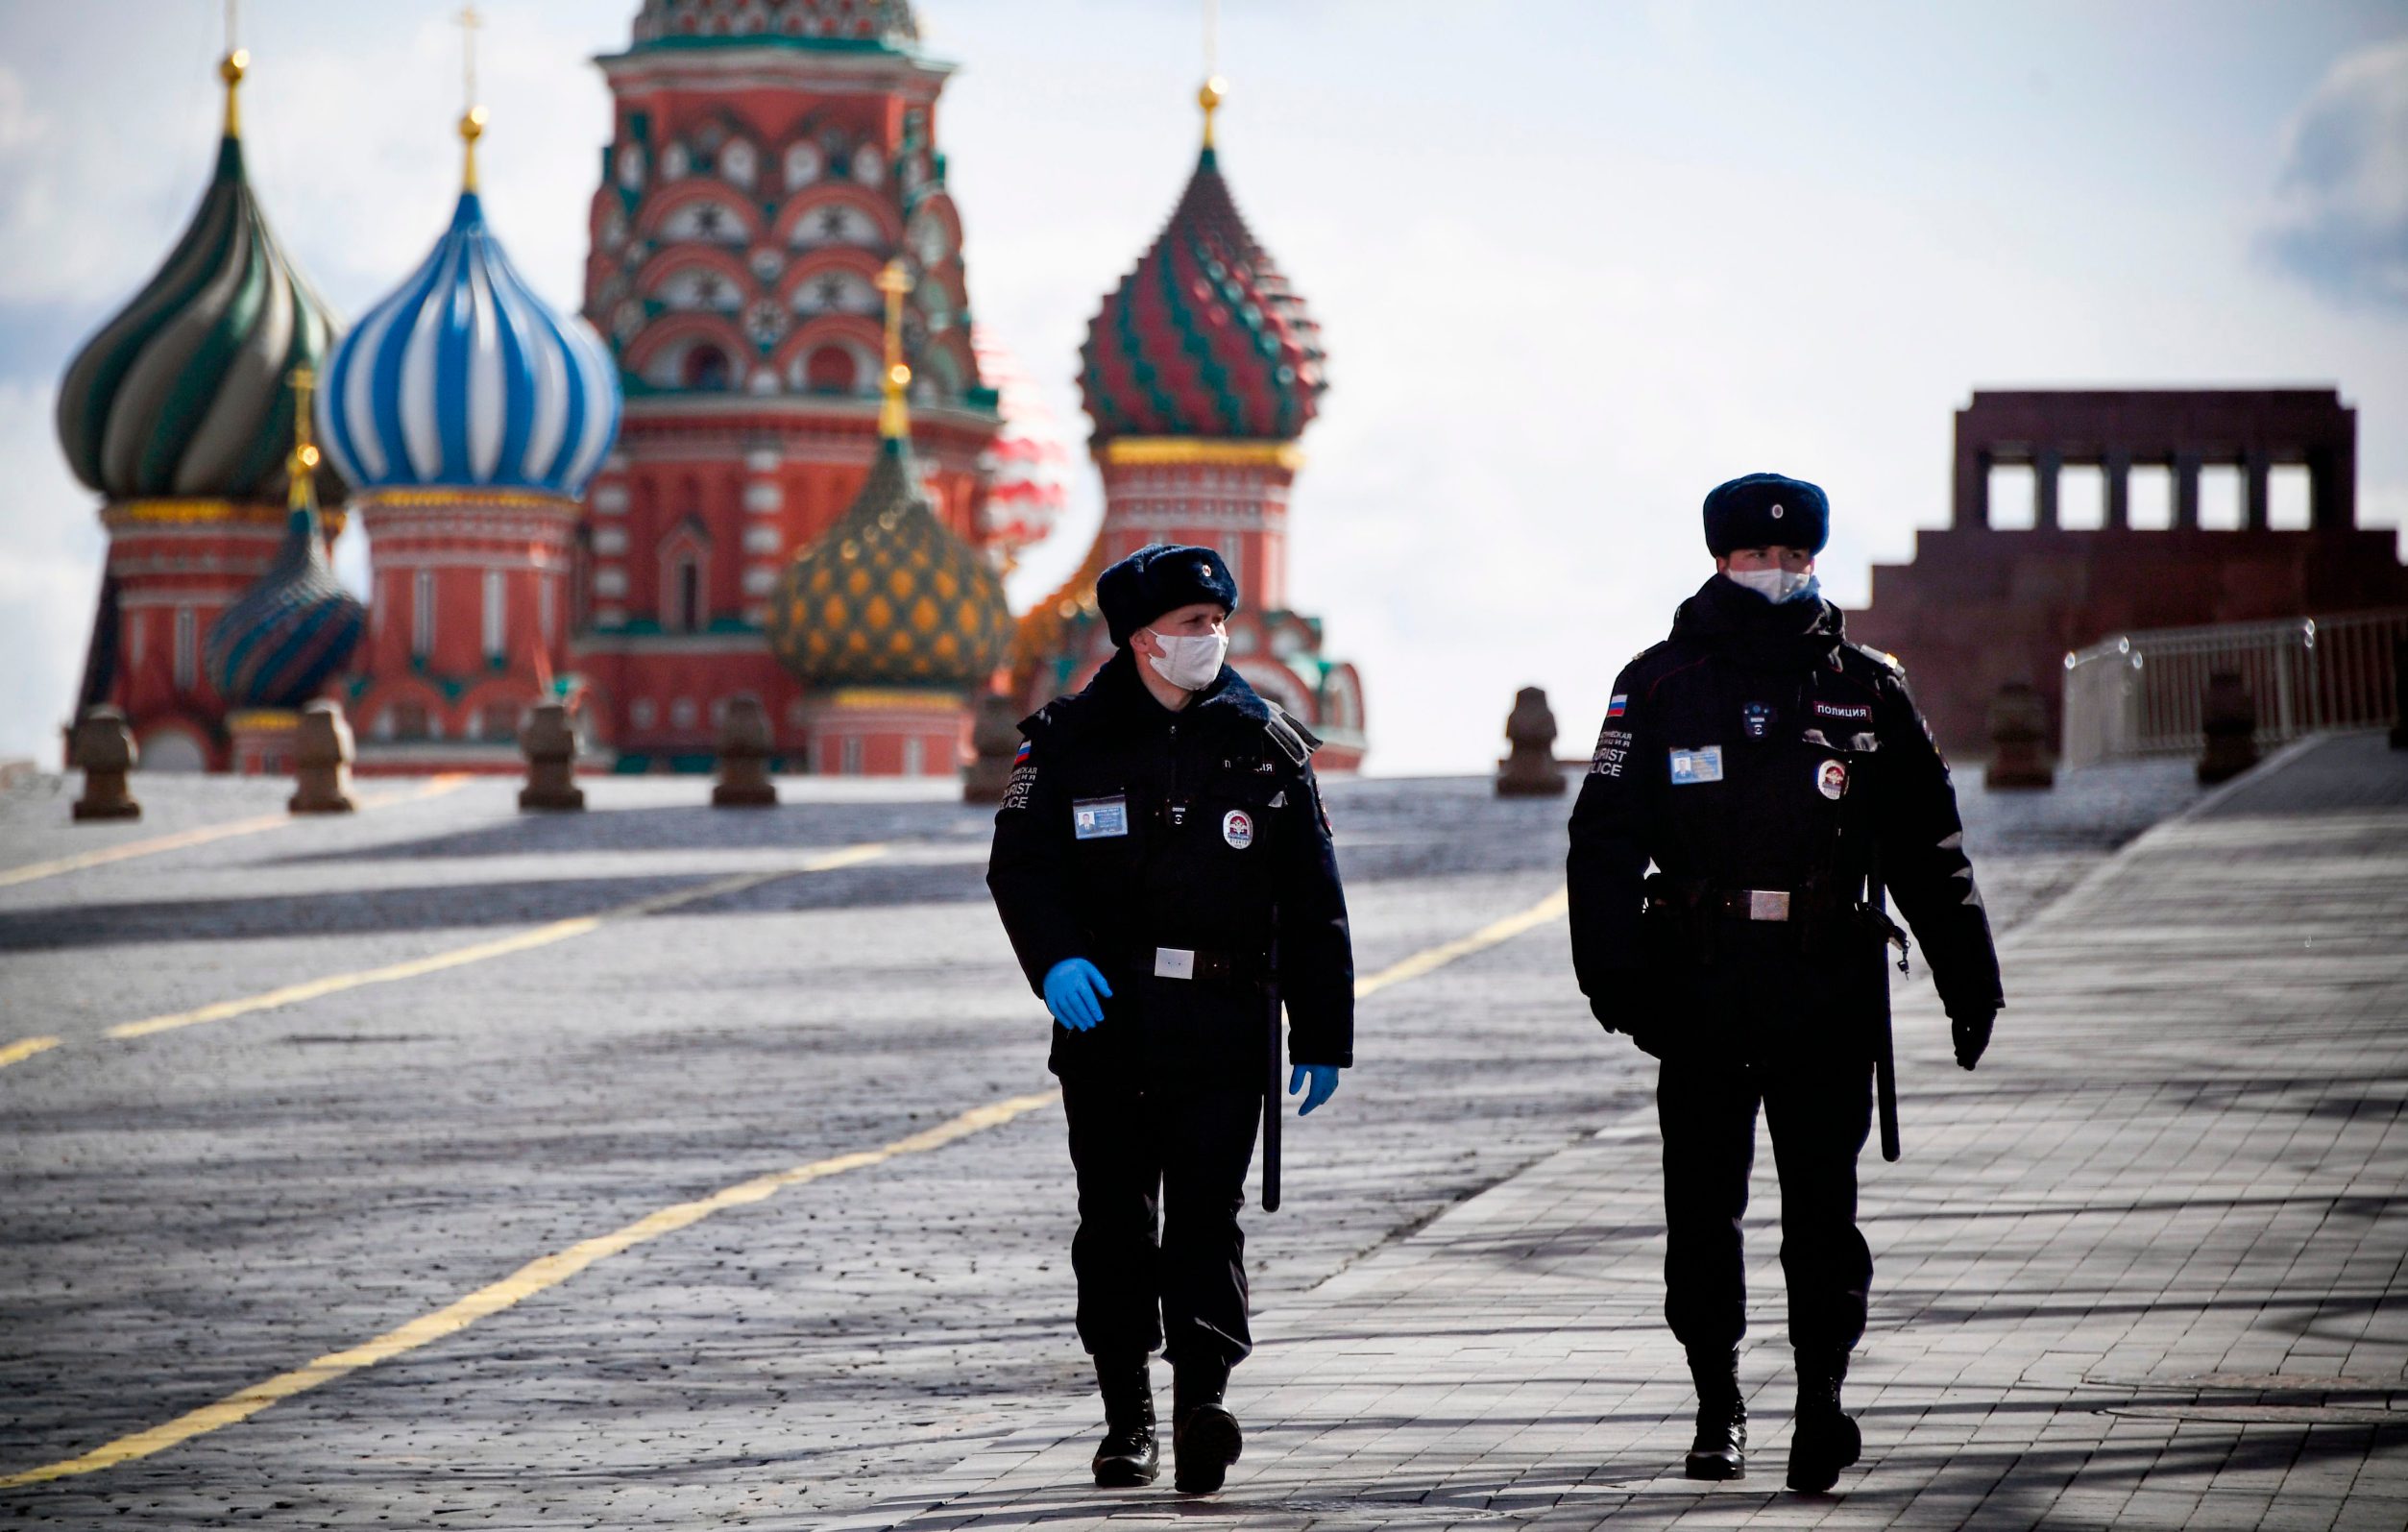 Police officers patrol deserted Red Square in Moscow on April 6, 2020, amid the spread of the COVID-19 coronavirus. (Photo by Alexander NEMENOV / AFP)